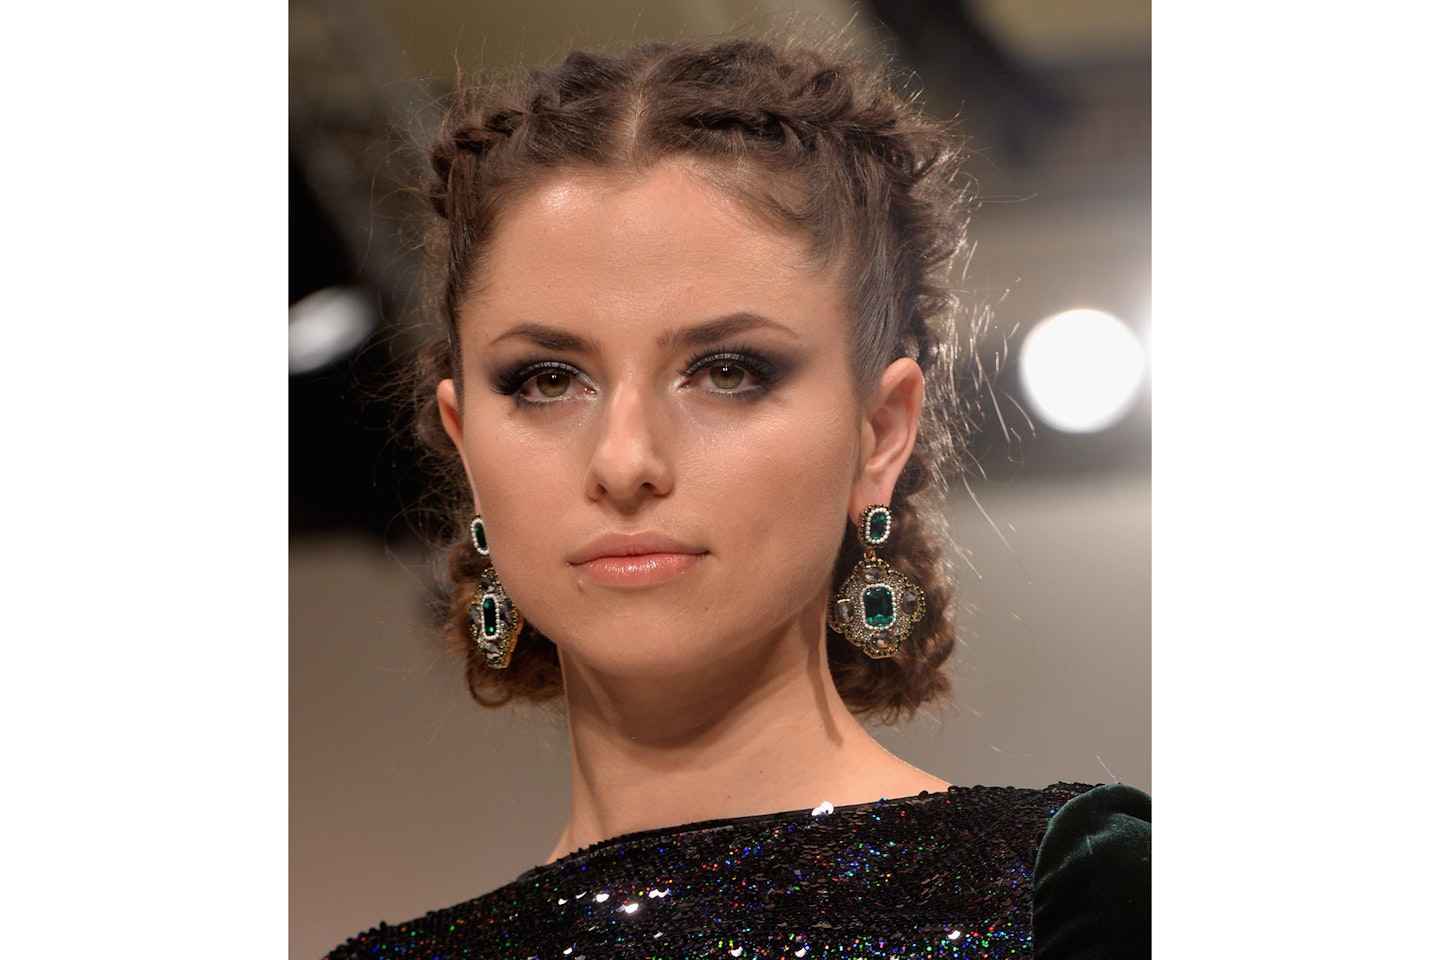 Plaits hairstyle ideas AW16 Trends